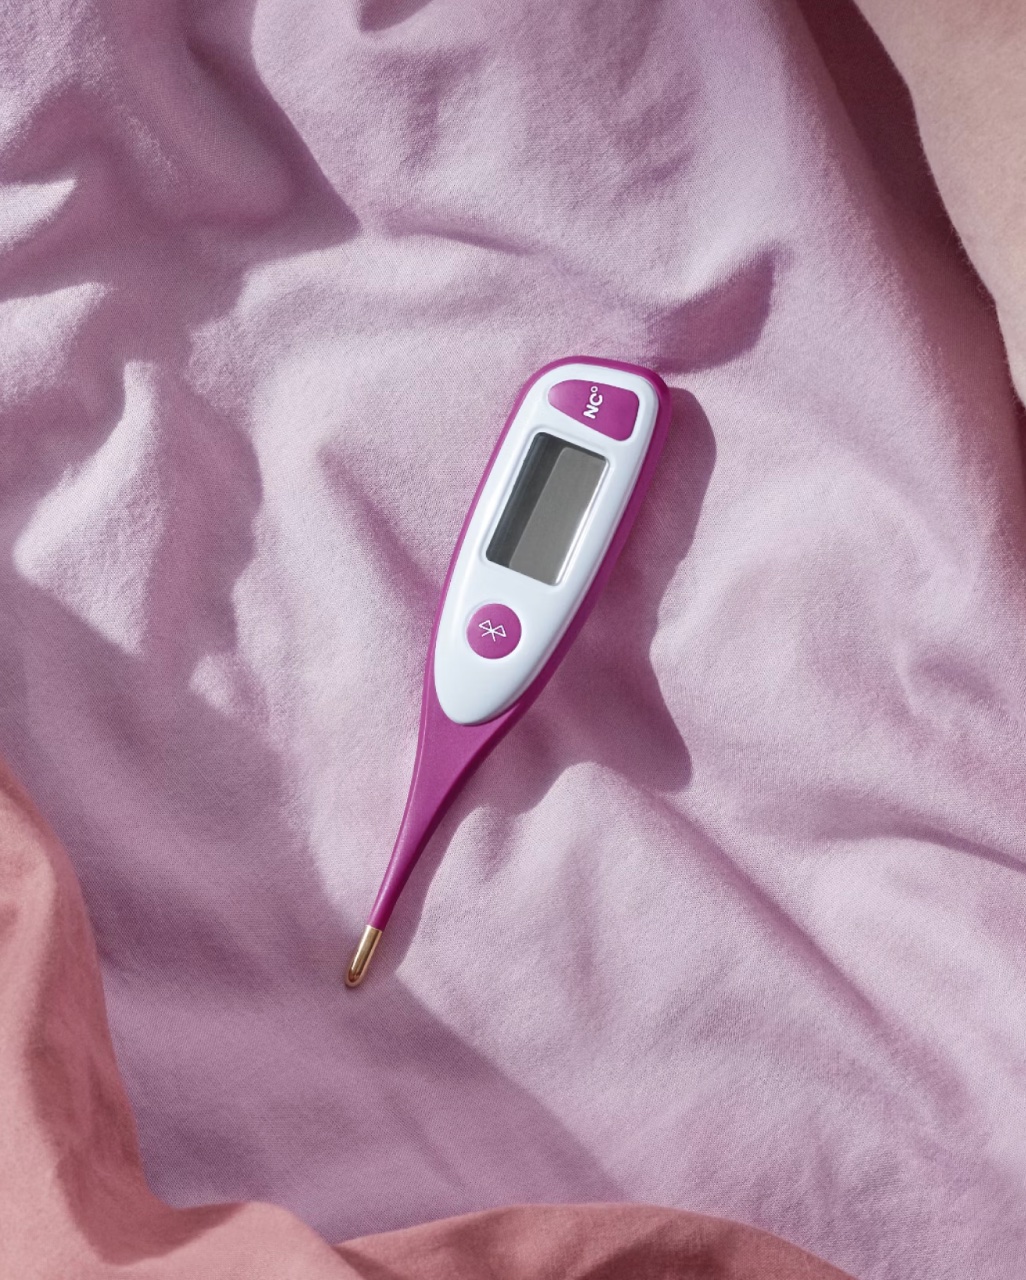 Digital thermometer with a pink and white design resting on a pink fabric surface.